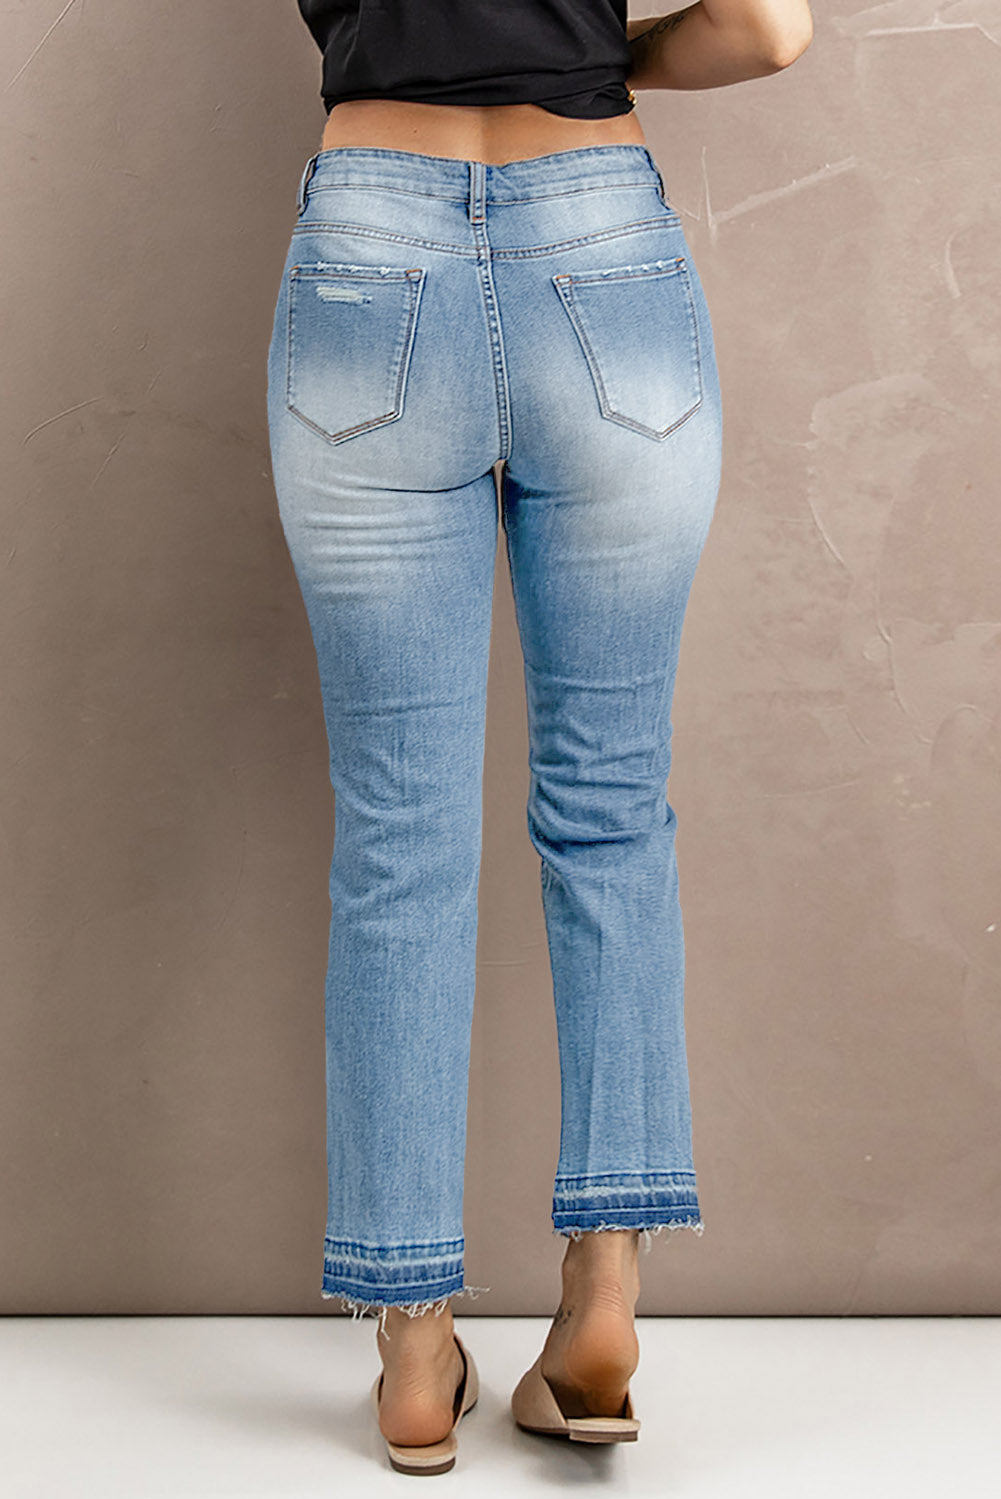 Sky Blue Washed Straight Leg Distressed High Waist Jeans Jeans JT's Designer Fashion